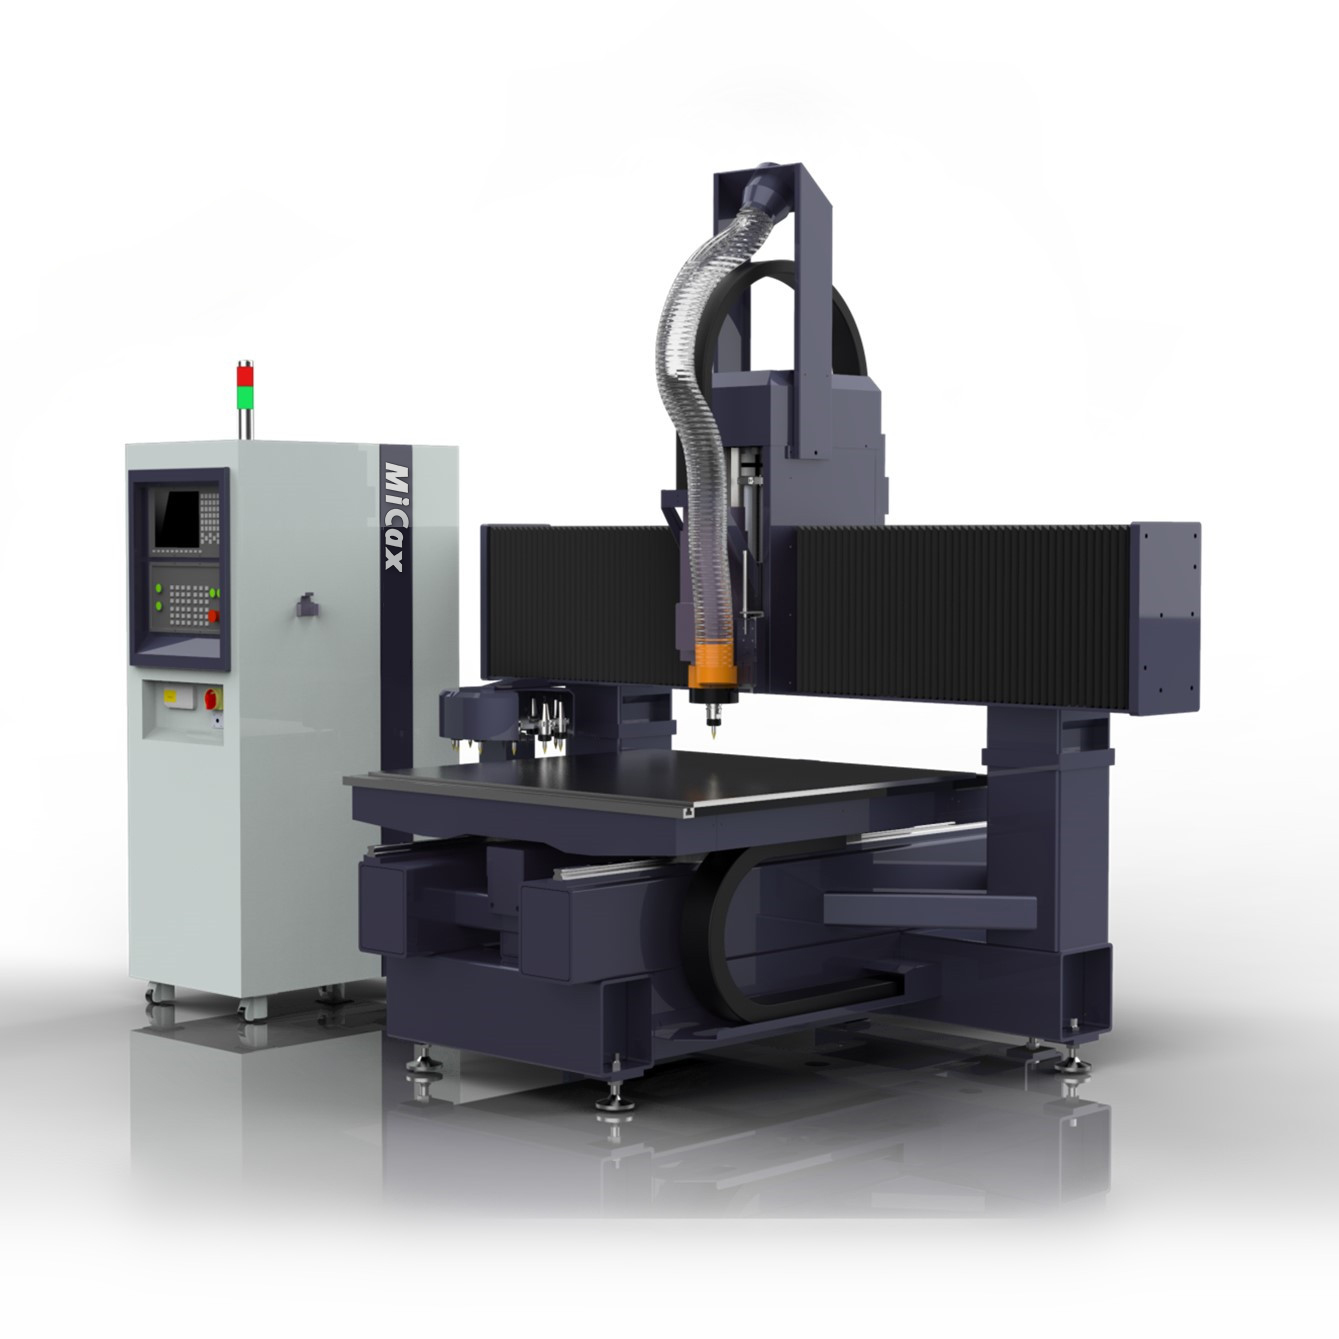 MiCax CNC Router MS1 RTC Featured Image